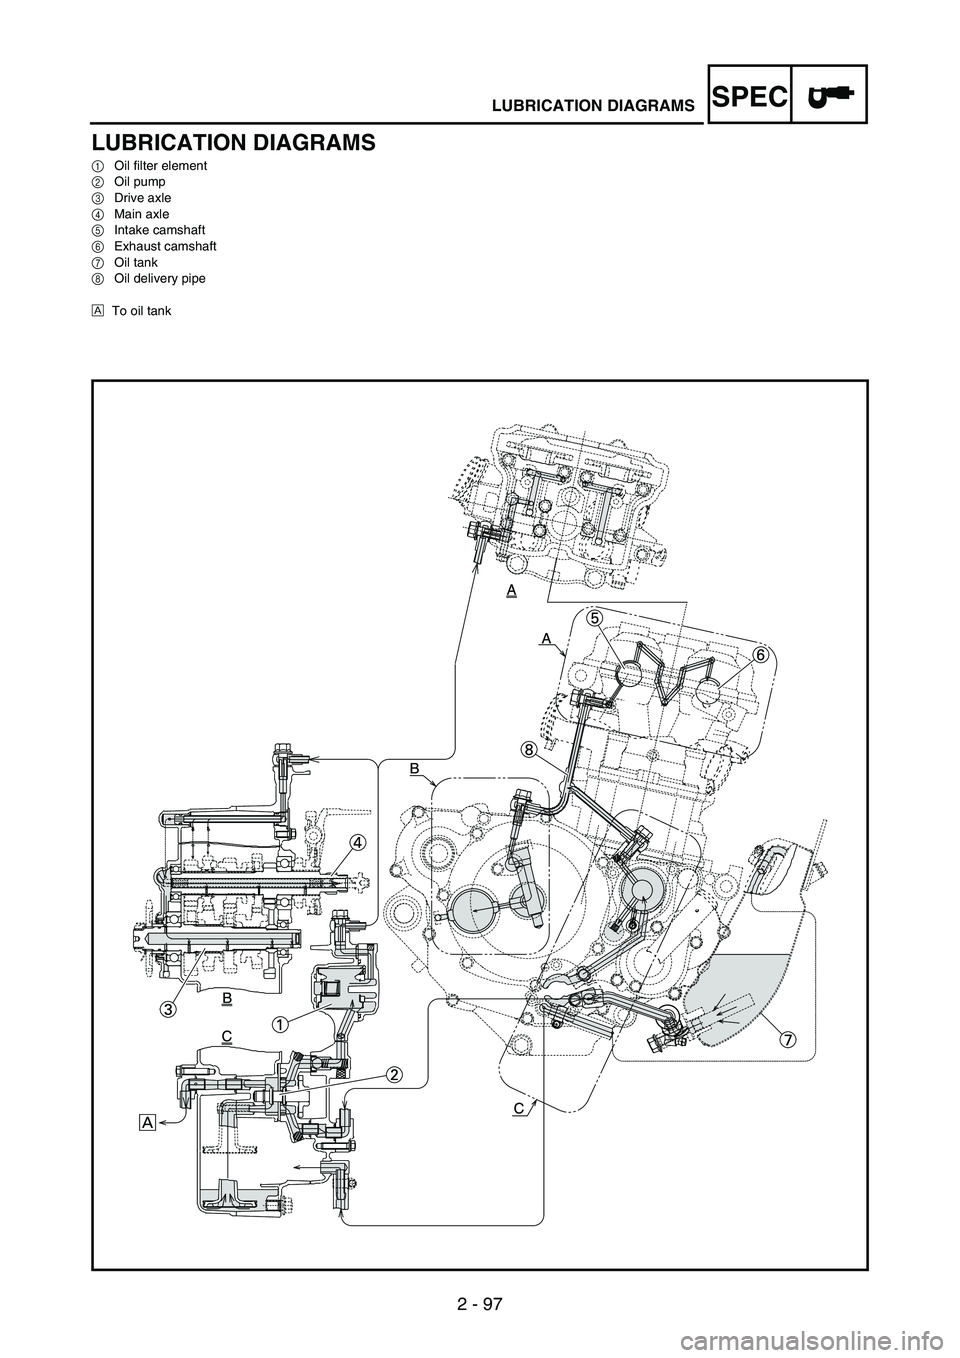 YAMAHA WR 250F 2007  Manuale duso (in Italian) SPEC
2 - 97
LUBRICATION DIAGRAMS
LUBRICATION DIAGRAMS
1Oil filter element
2Oil pump
3Drive axle
4Main axle
5Intake camshaft
6Exhaust camshaft
7Oil tank
8Oil delivery pipe
ÈTo oil tank 